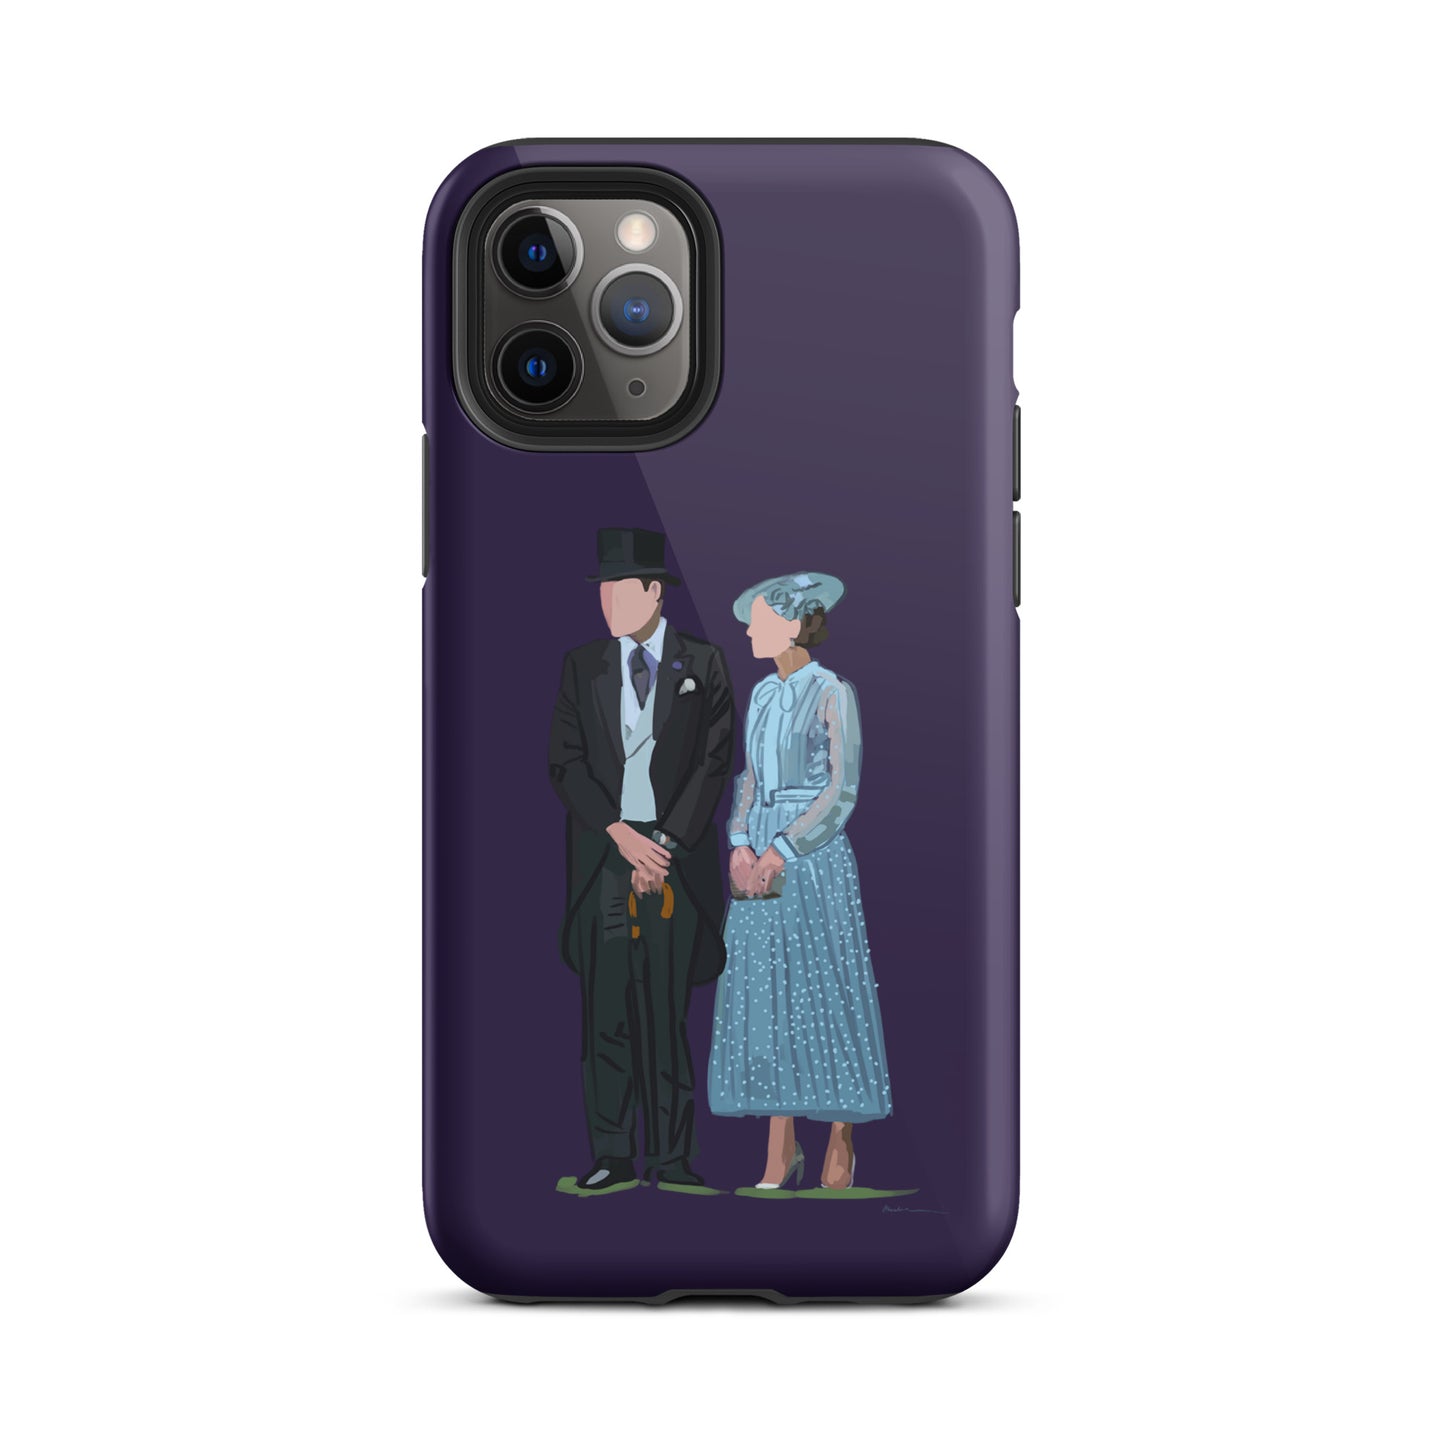 Kate and William Tough iPhone case